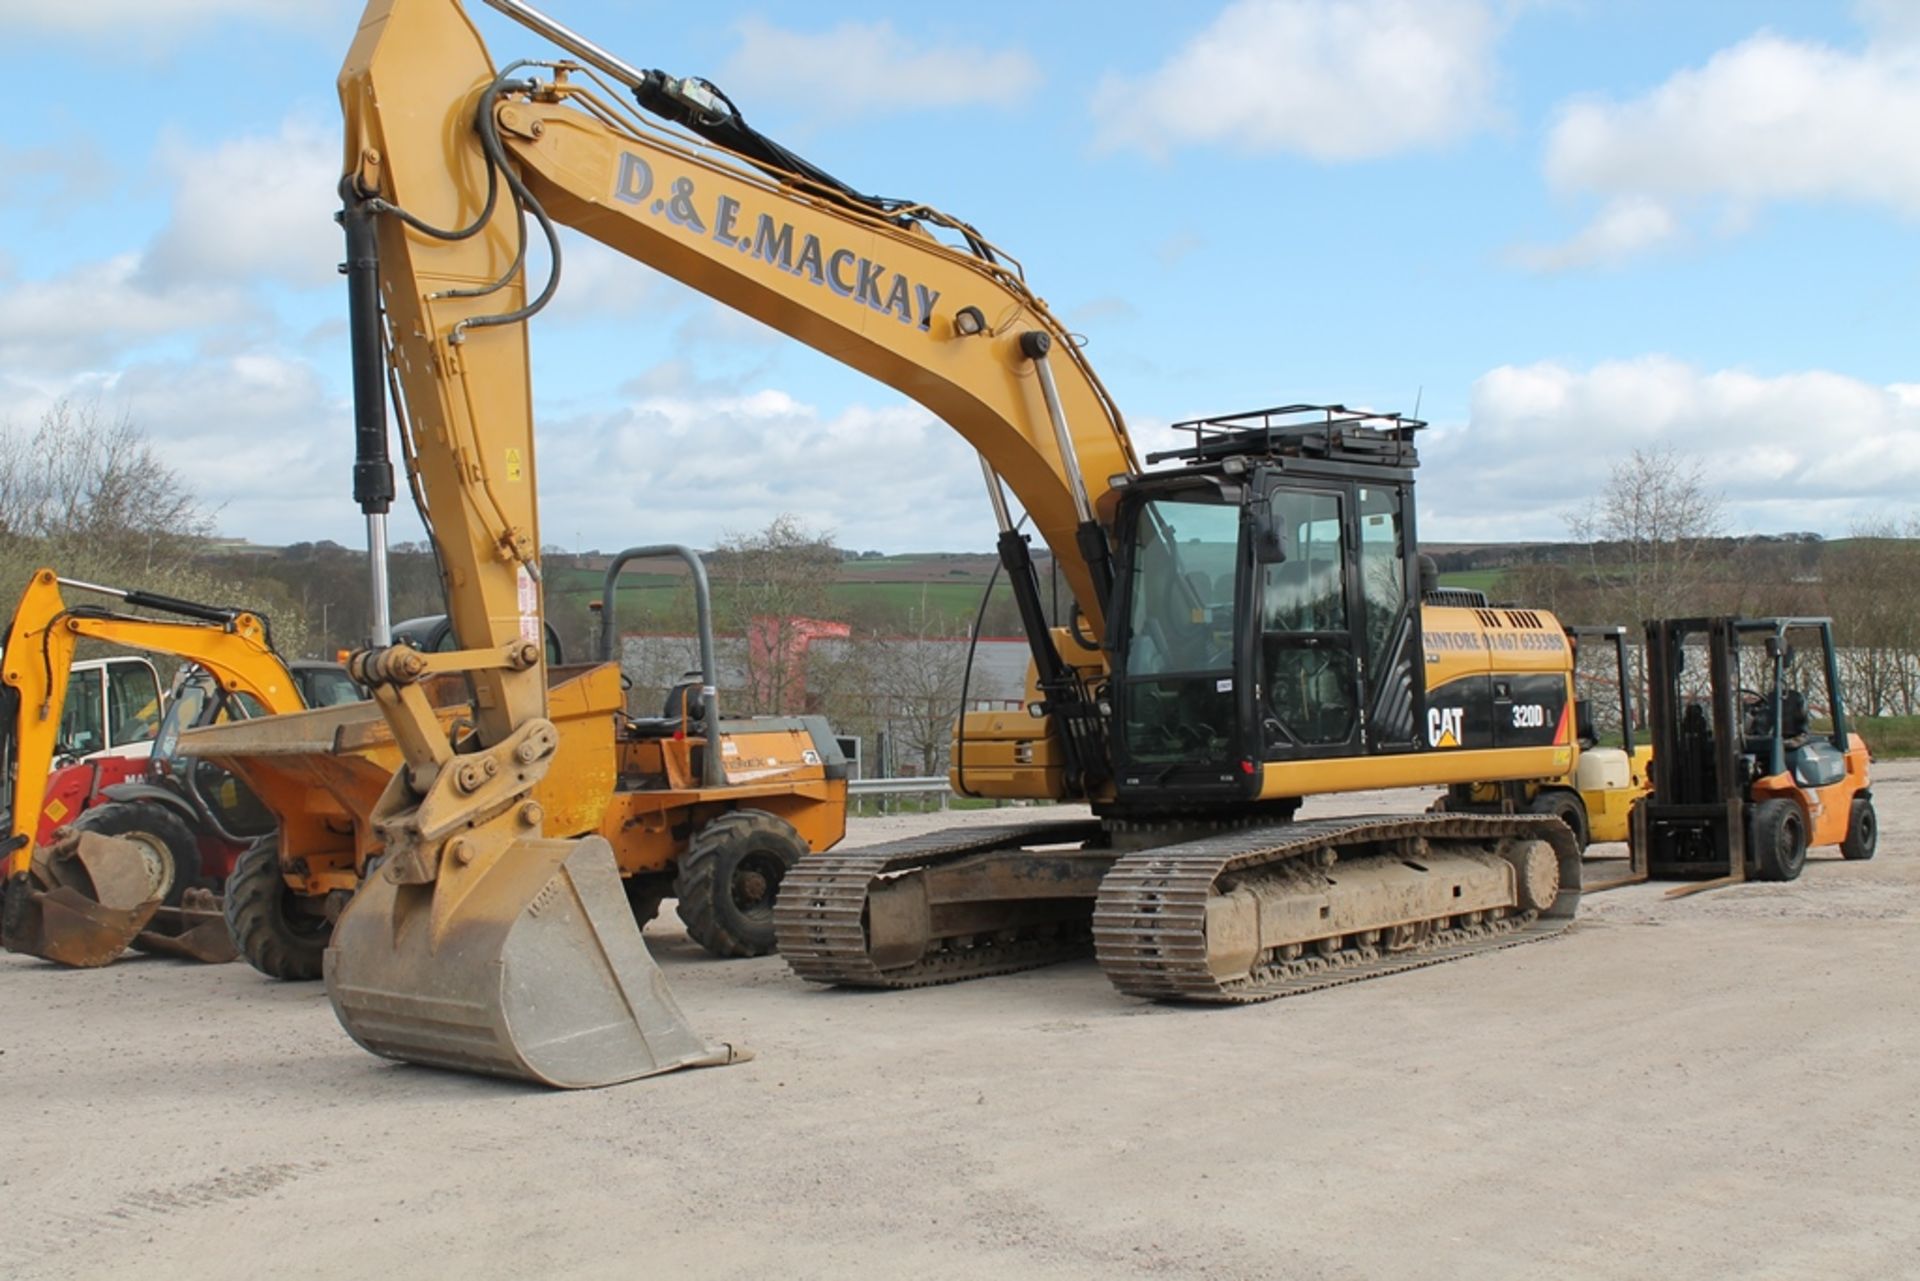 CATERPILLAR 320DL, NOV- 2010, 9108HRS, New tracks & sprockets fitted March 2016, PLUS VAT, , H